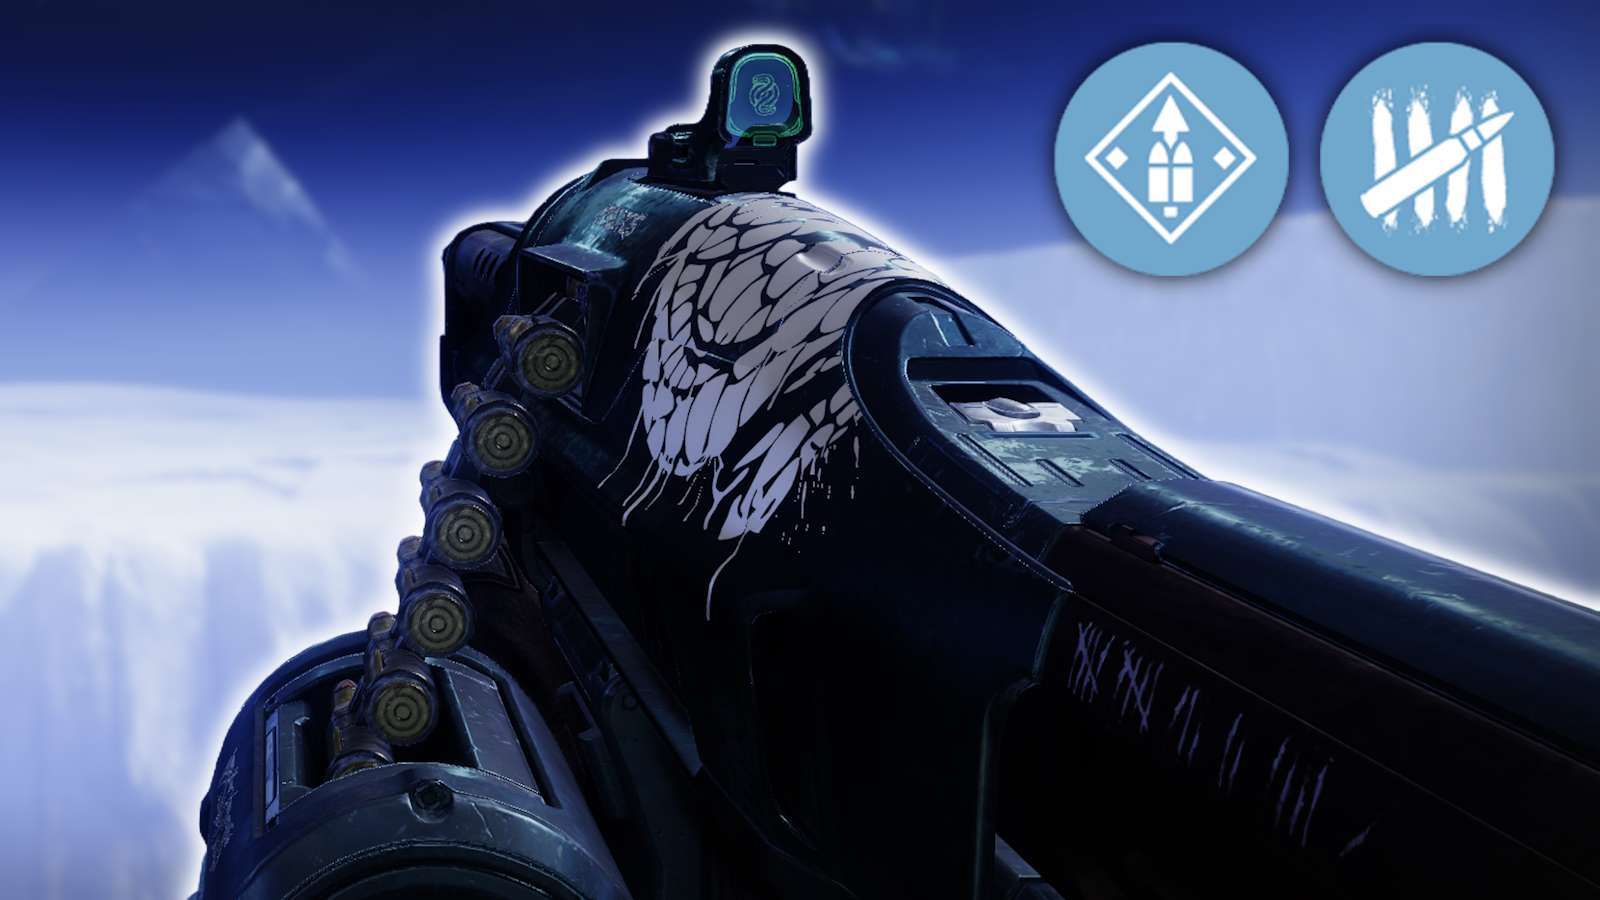 The 21% Delirium machine gun in Destiny 2 with Overflow and Killing Tally perks.